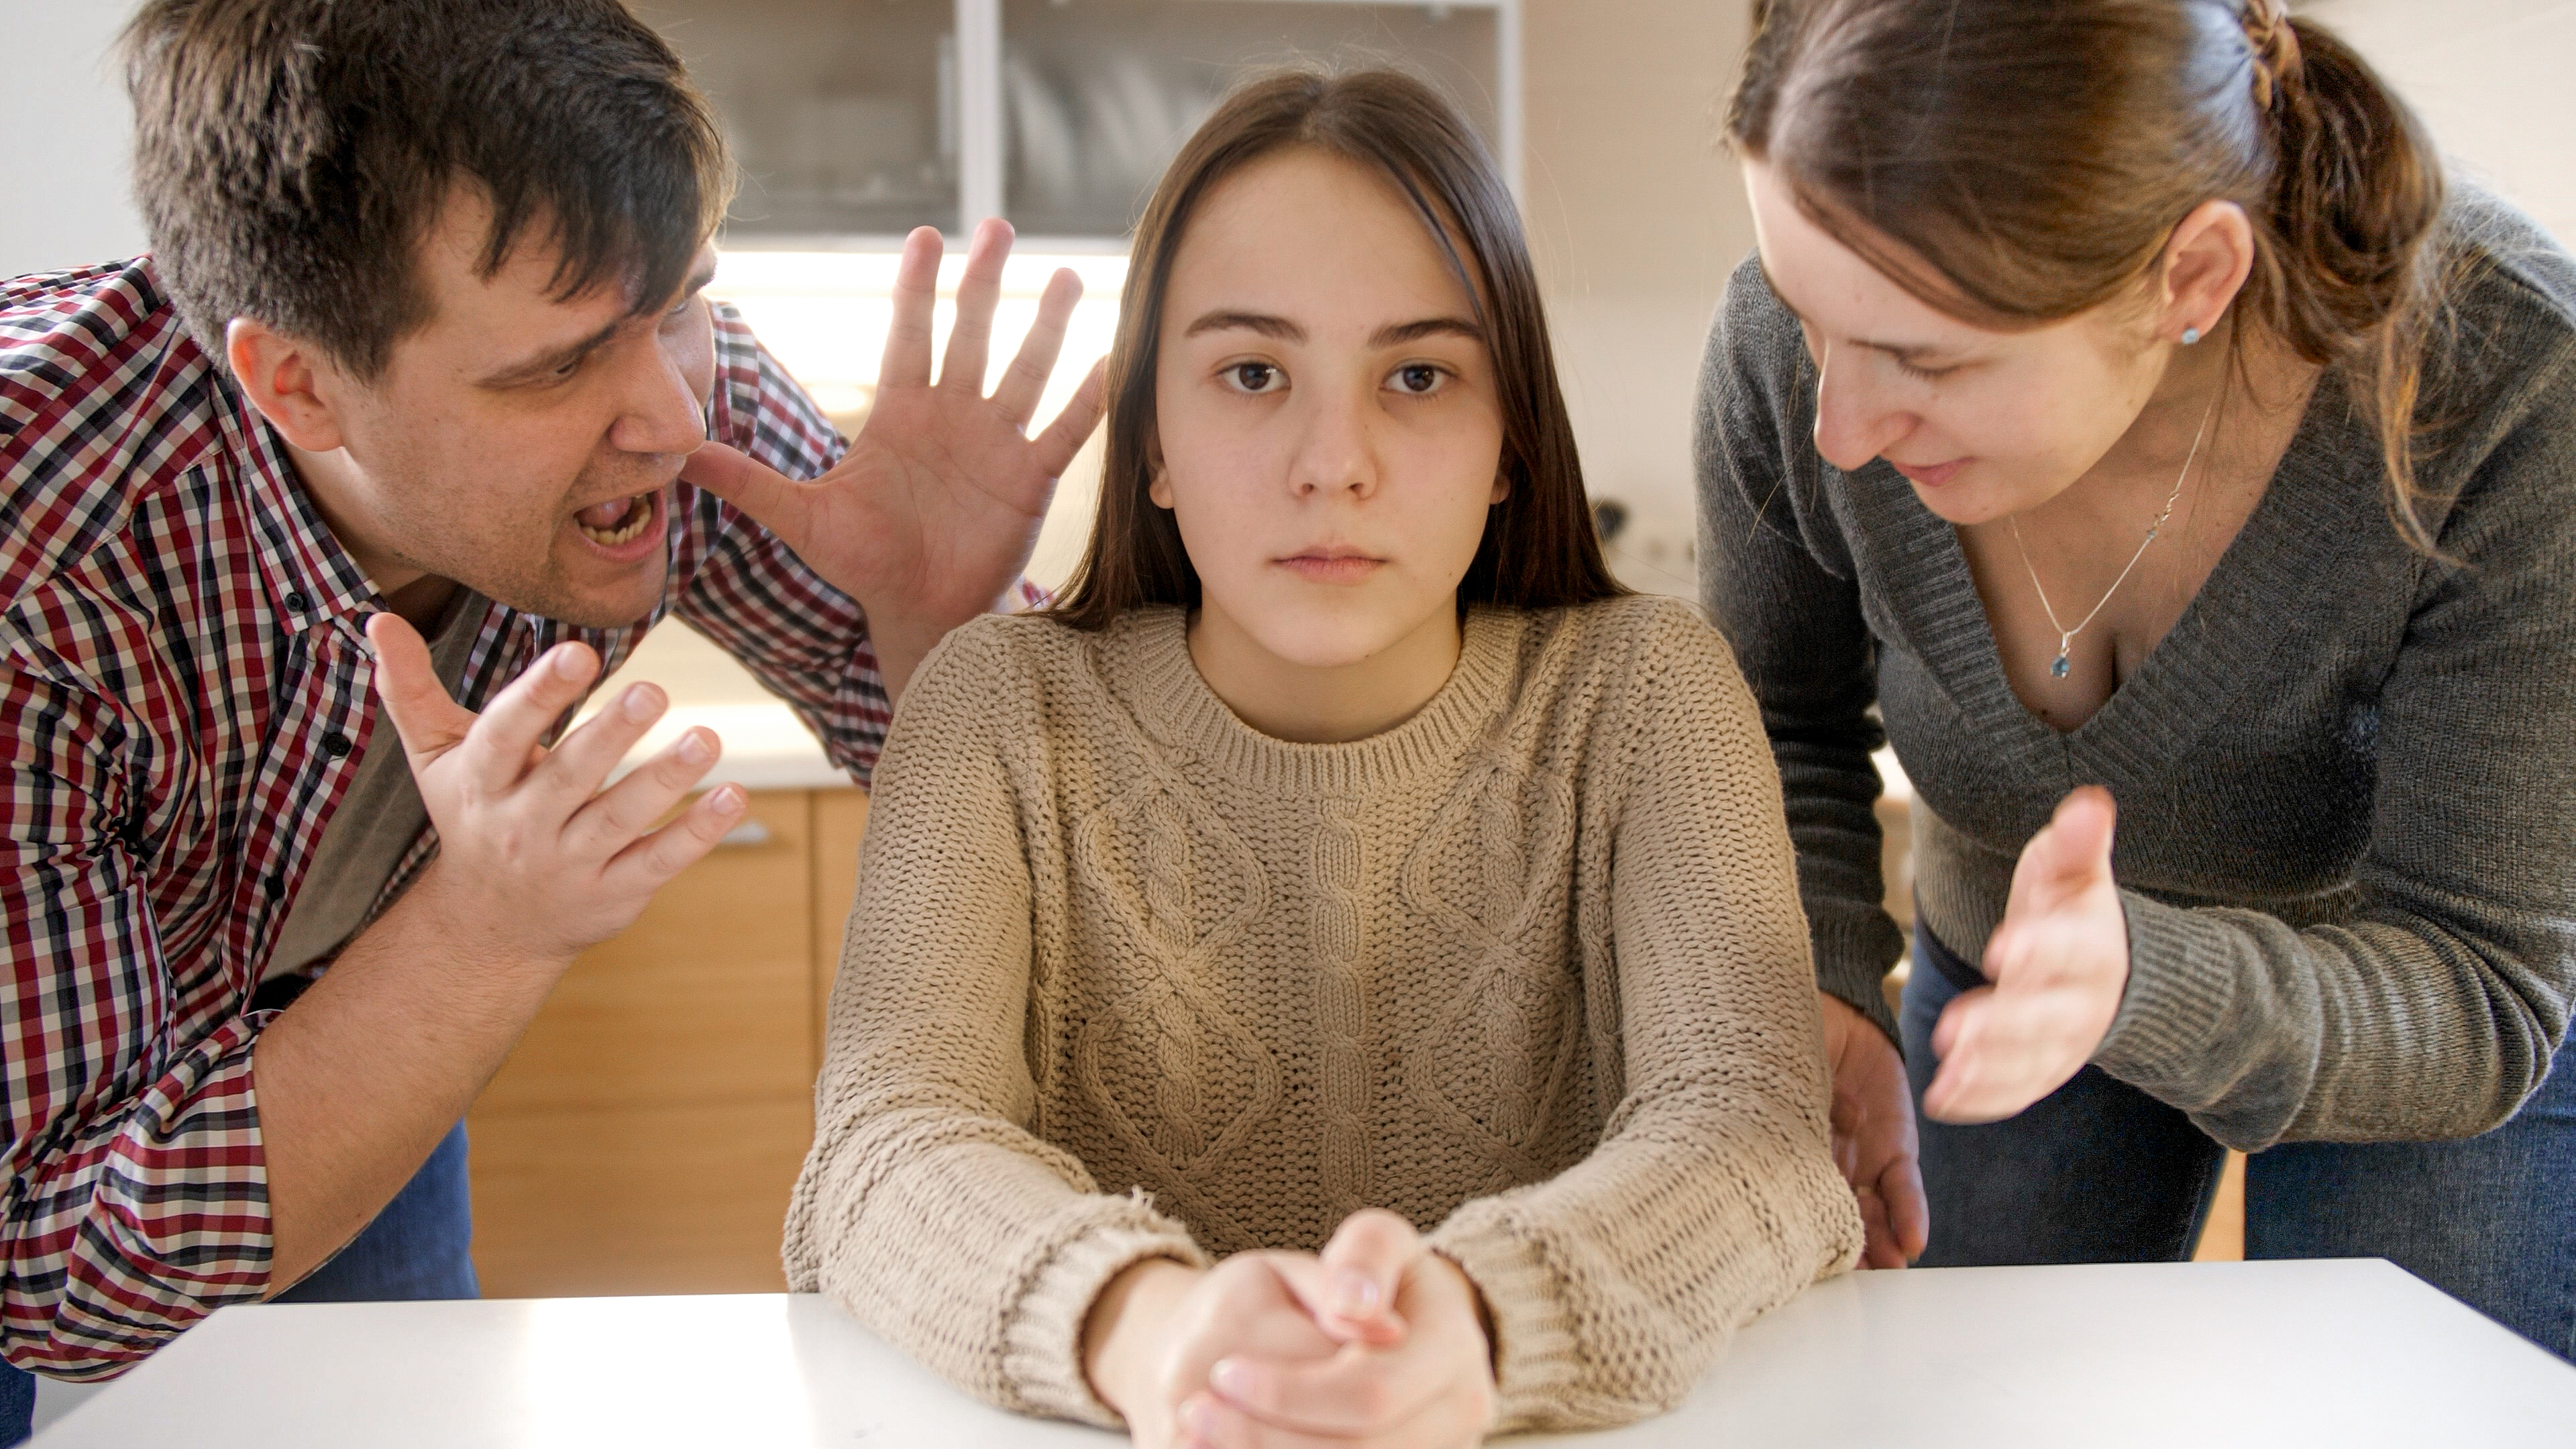 Parents yelling at their daughter | Source: Shutterstock